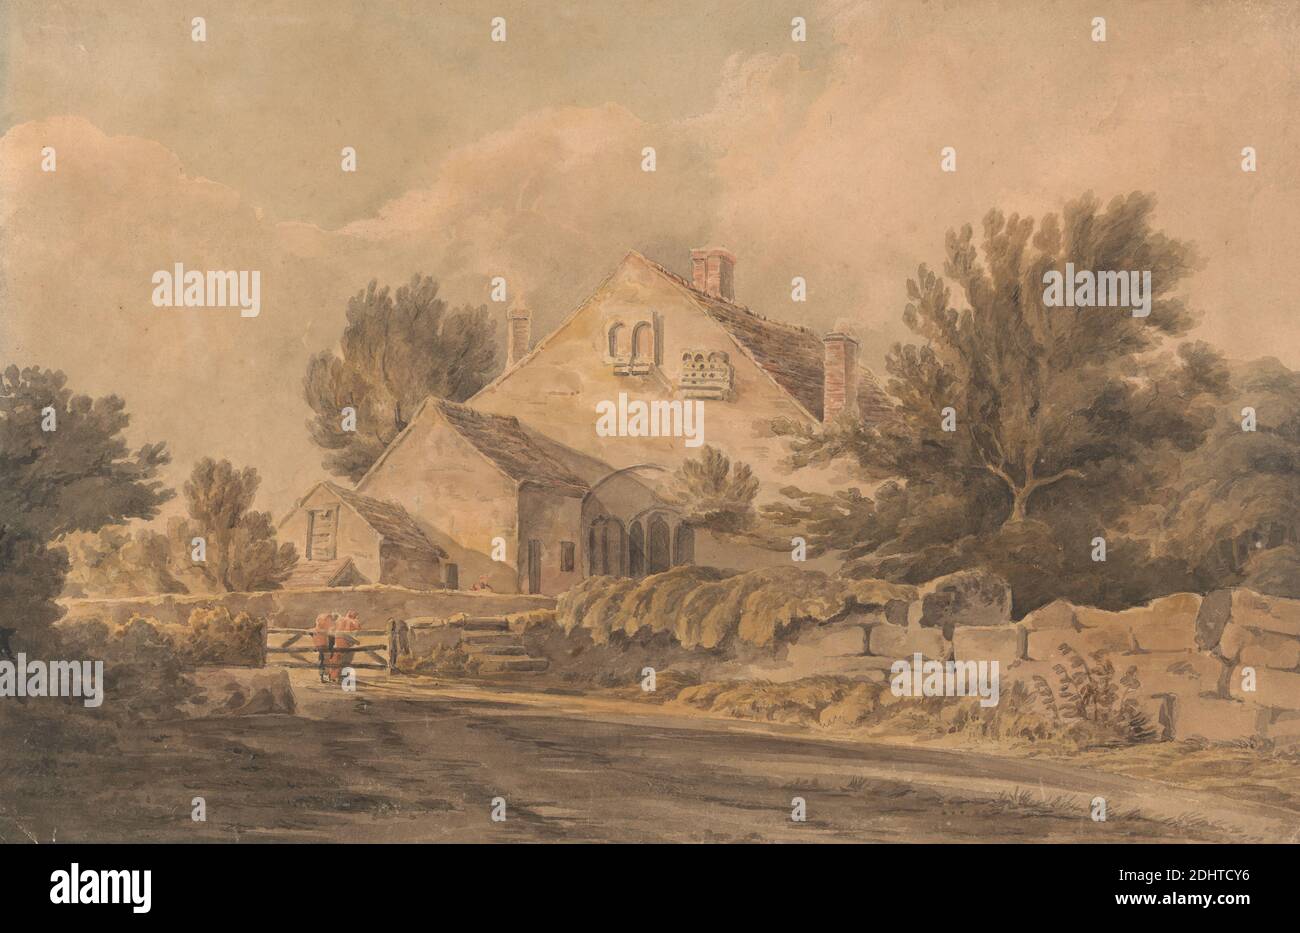 Near Goudhurst, Kent, Attributed to J. Pearson, active 1860, 1860, Watercolor and graphite on medium, slightly textured, cream wove paper, Sheet: 9 1/4 × 14 1/8 inches (23.5 × 35.9 cm), architectural subject, blind arches, chimneys, farmhouse, gate, wall, England, Europe, Goudhurst, Kent, United Kingdom Stock Photo